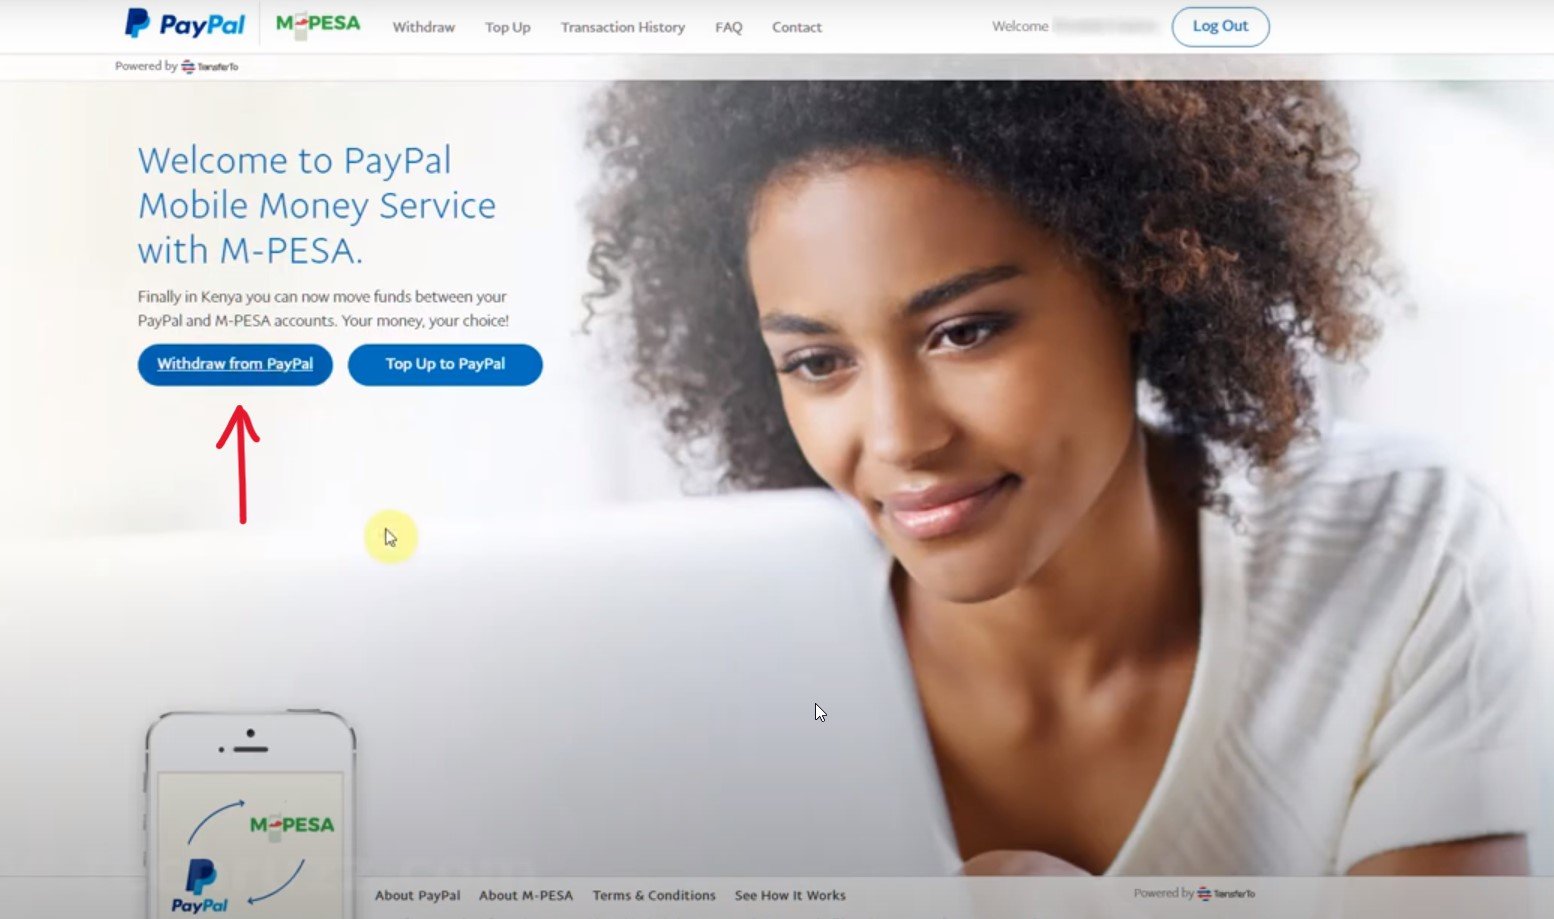 How To Withdraw Money From Paypal To M-Pesa